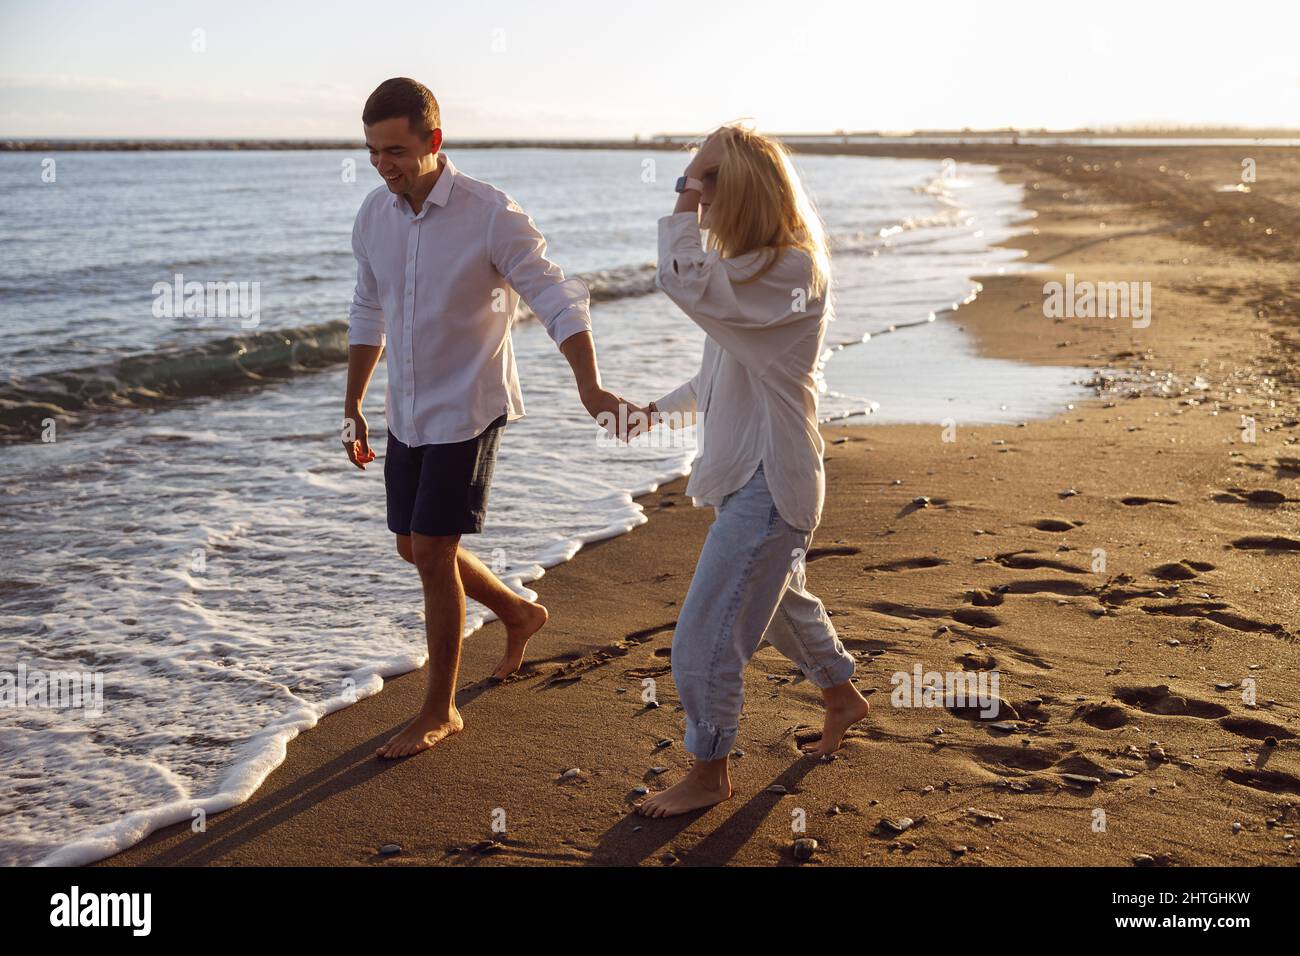 Beautiful couple walking barefoot on the beach holding hands Stock Photo